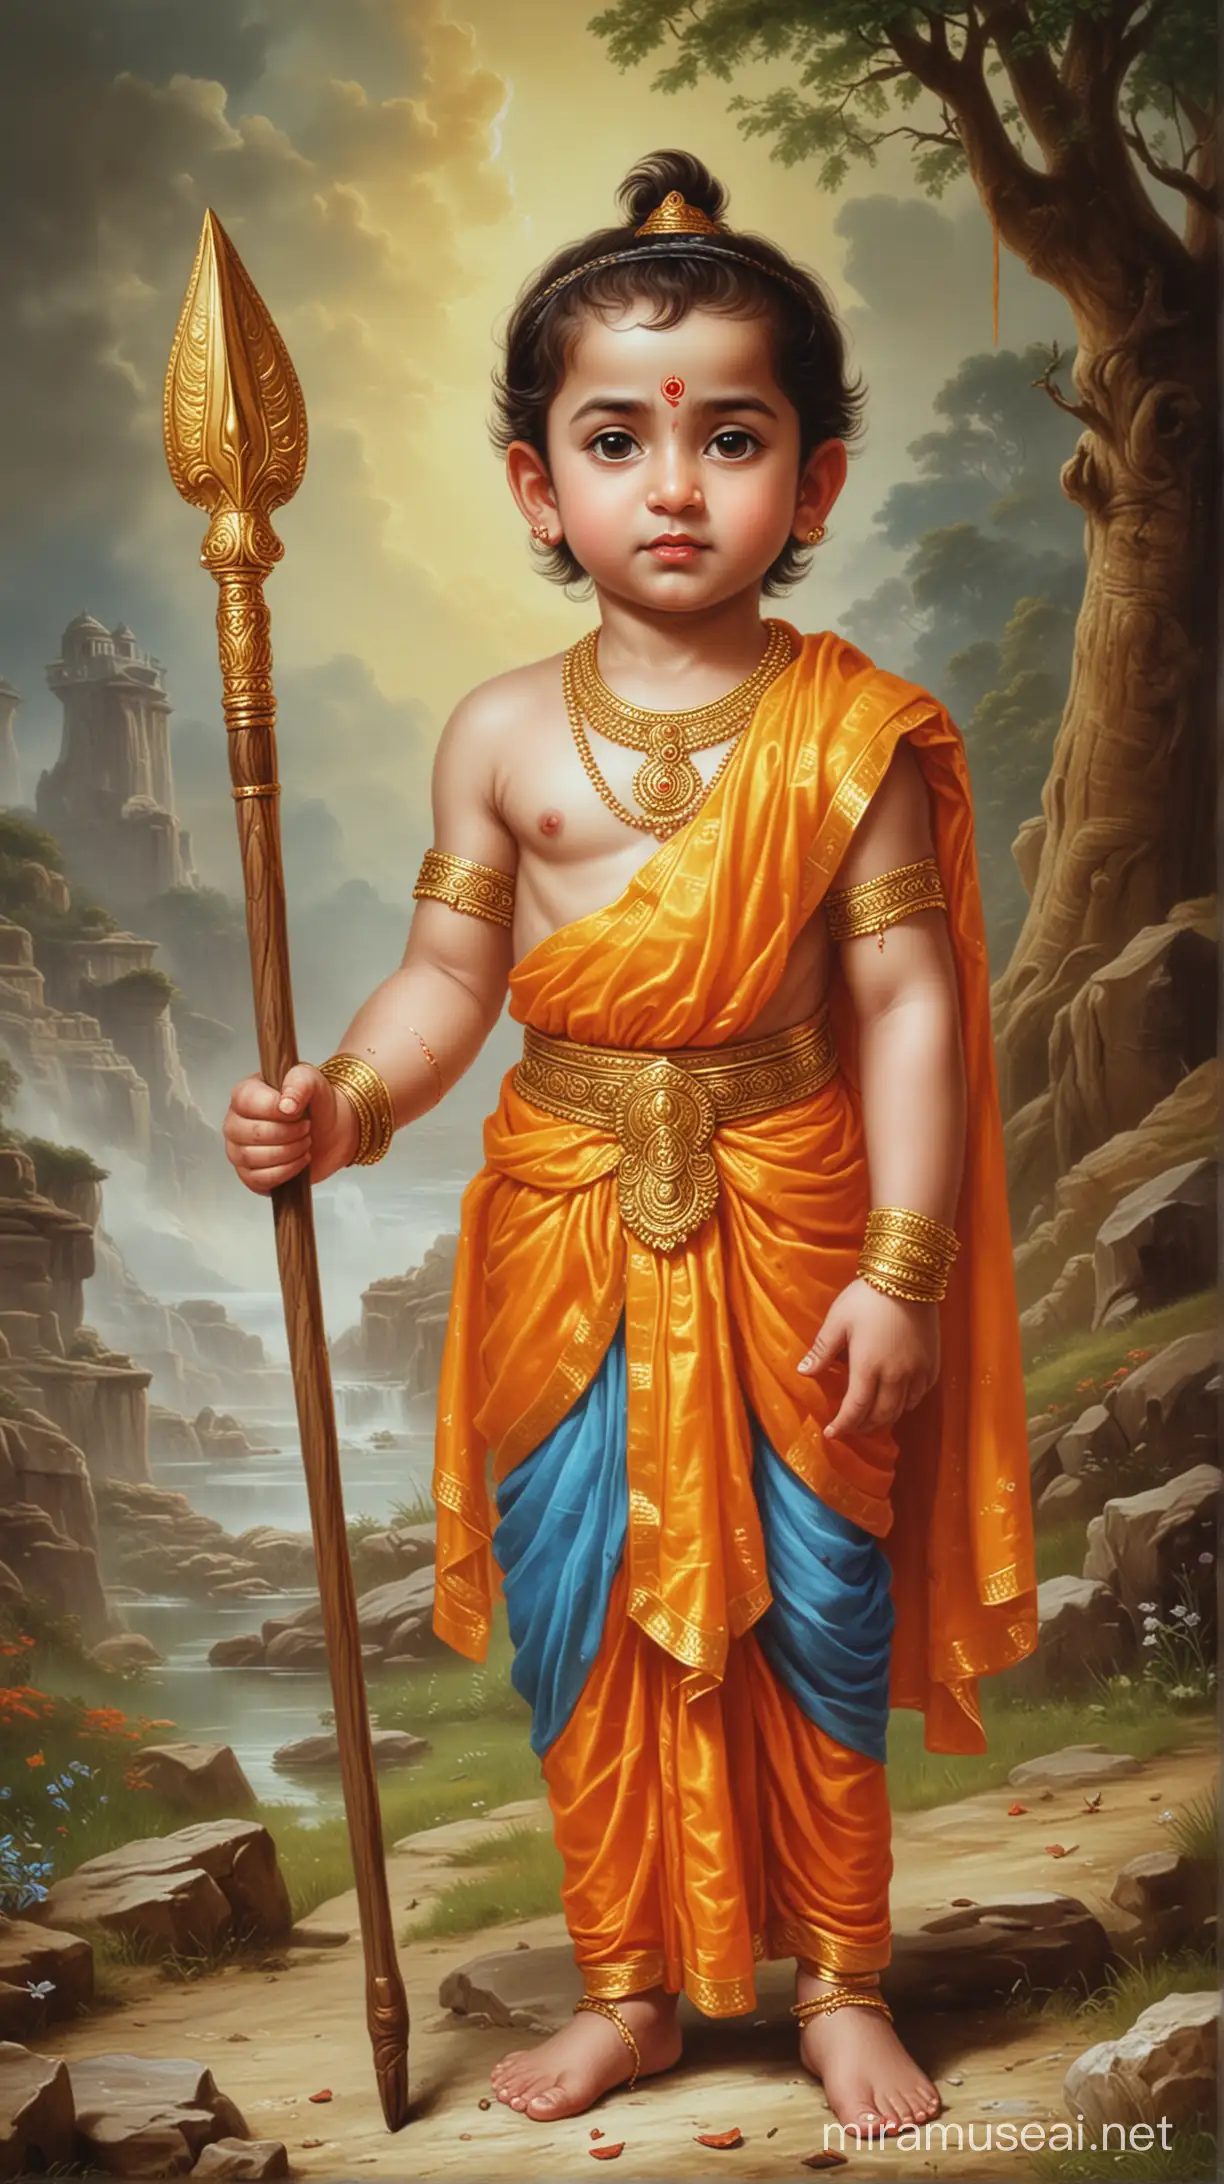 Young Lord Ram in Ancient Indian Kingdom